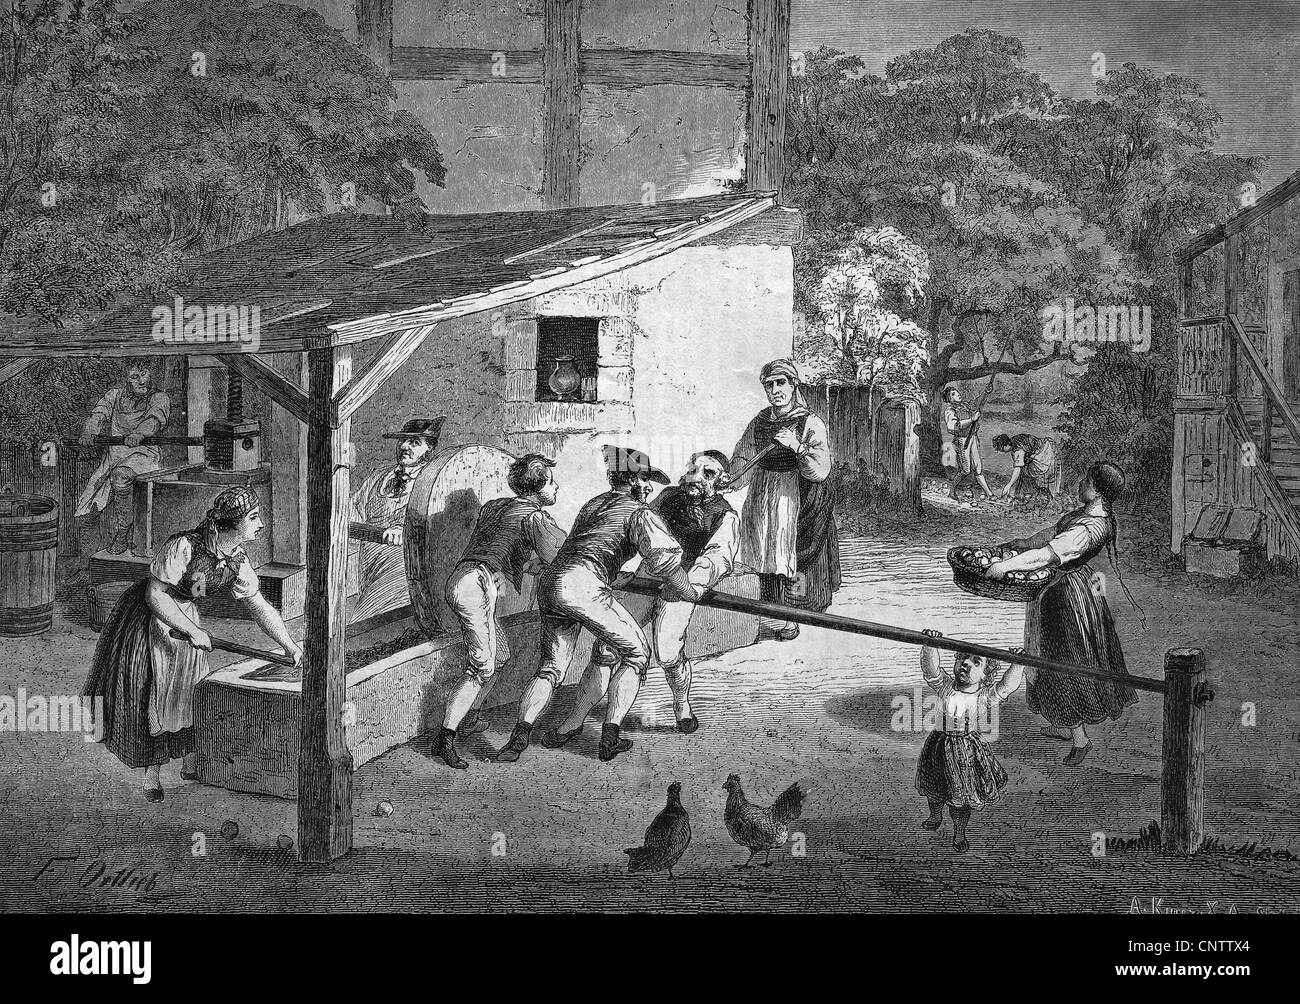 Men working on a must press in Swabia, Germany, historical engraving, 1869 Stock Photo